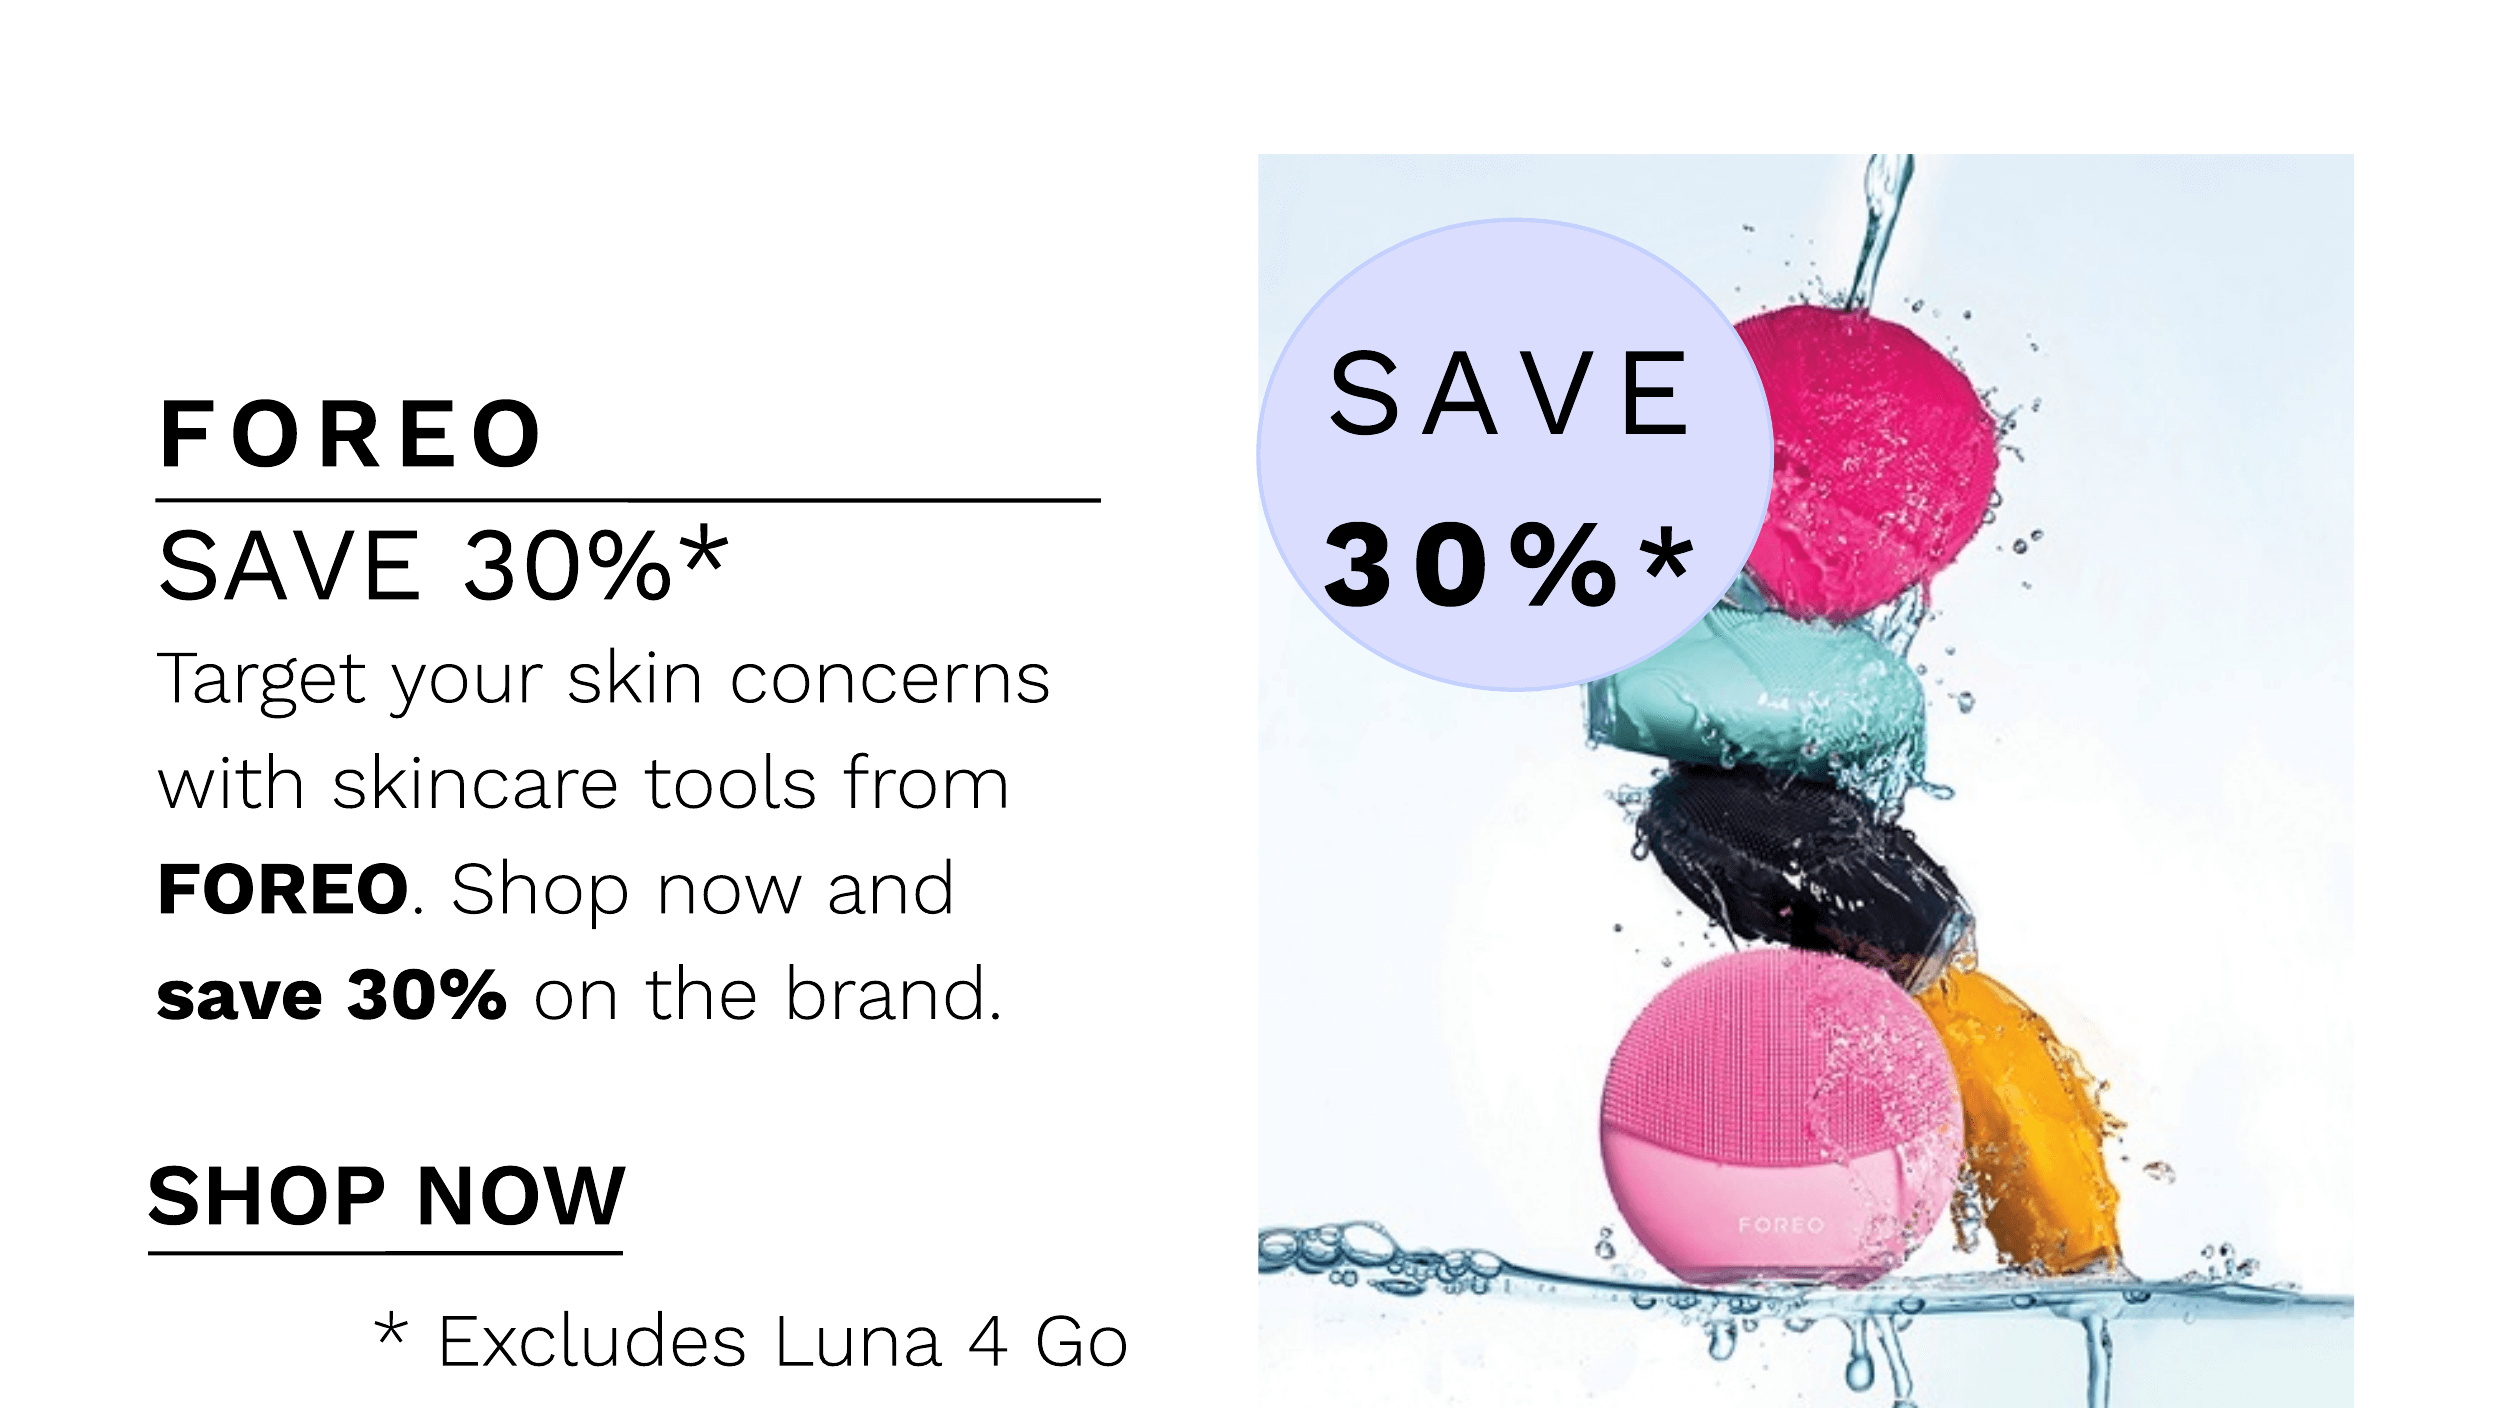 FOREO SAVE 30%* Target your skin concerns with skincare tools from FOREO. Shop now and save 30% on the brand. SHOP NOW * Excludes Luna 4 Go 